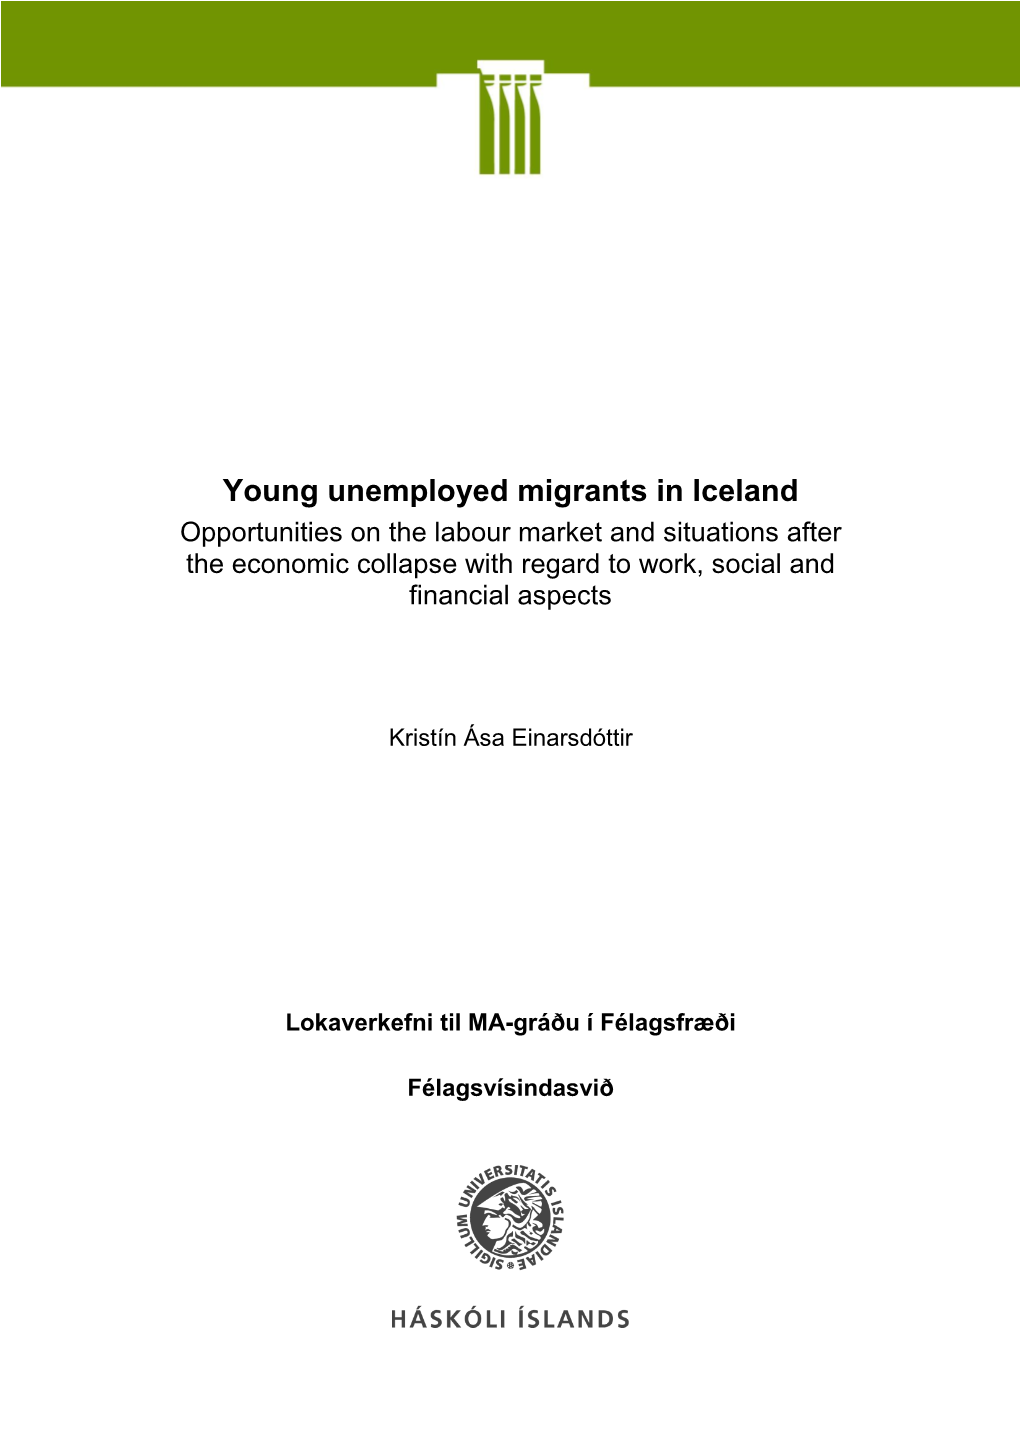 Young Unemployed Migrants in Iceland Opportunities on the Labour Market and Situations After the Economic Collapse with Regard to Work, Social and Financial Aspects